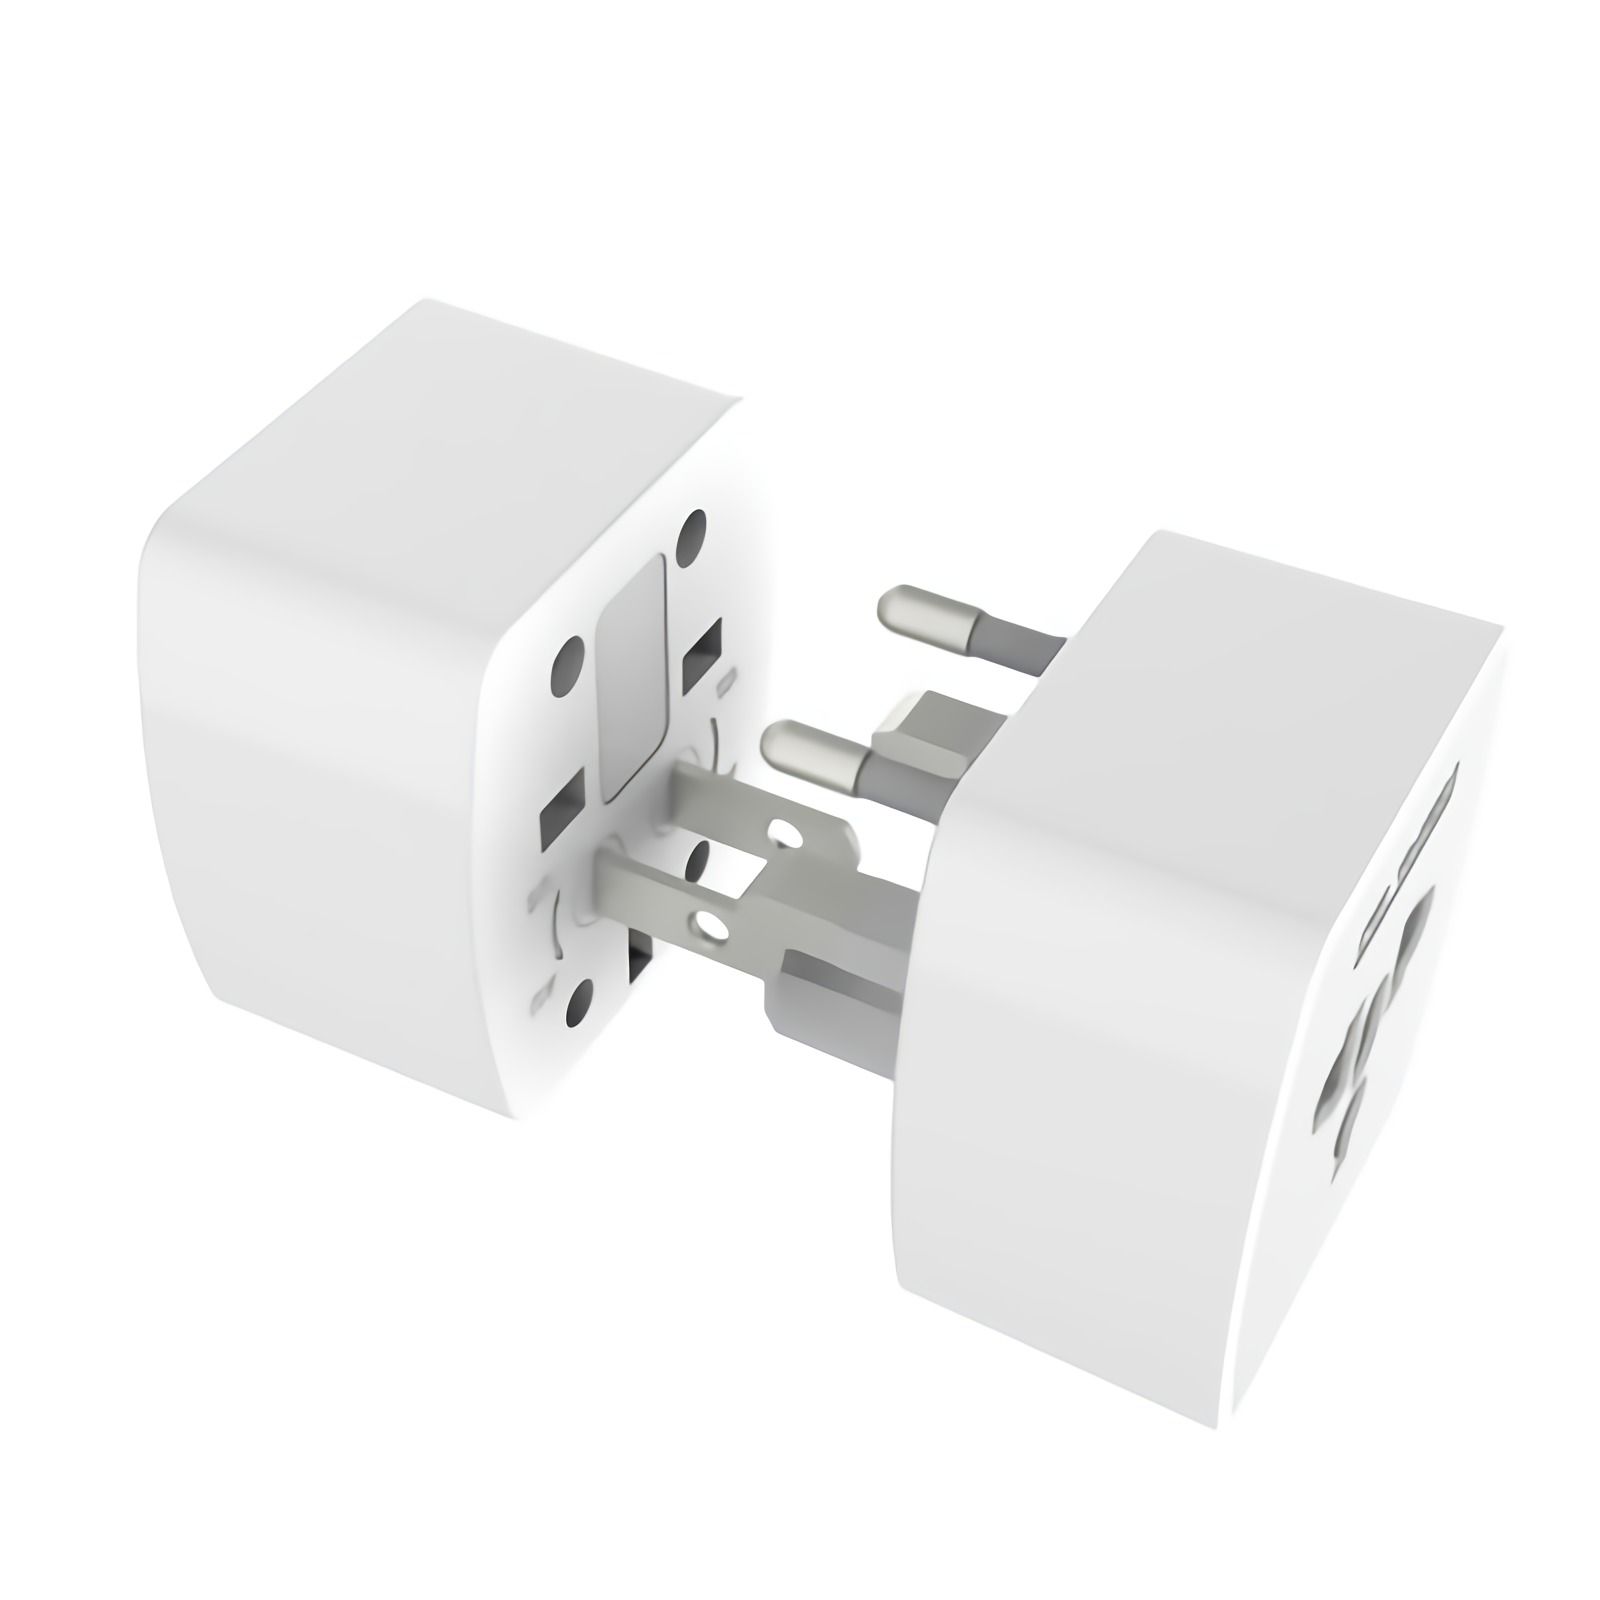 LDNIO-Travel-Adapter-Multifunction-Connector-Projectable-Gobal-Useful-1688741